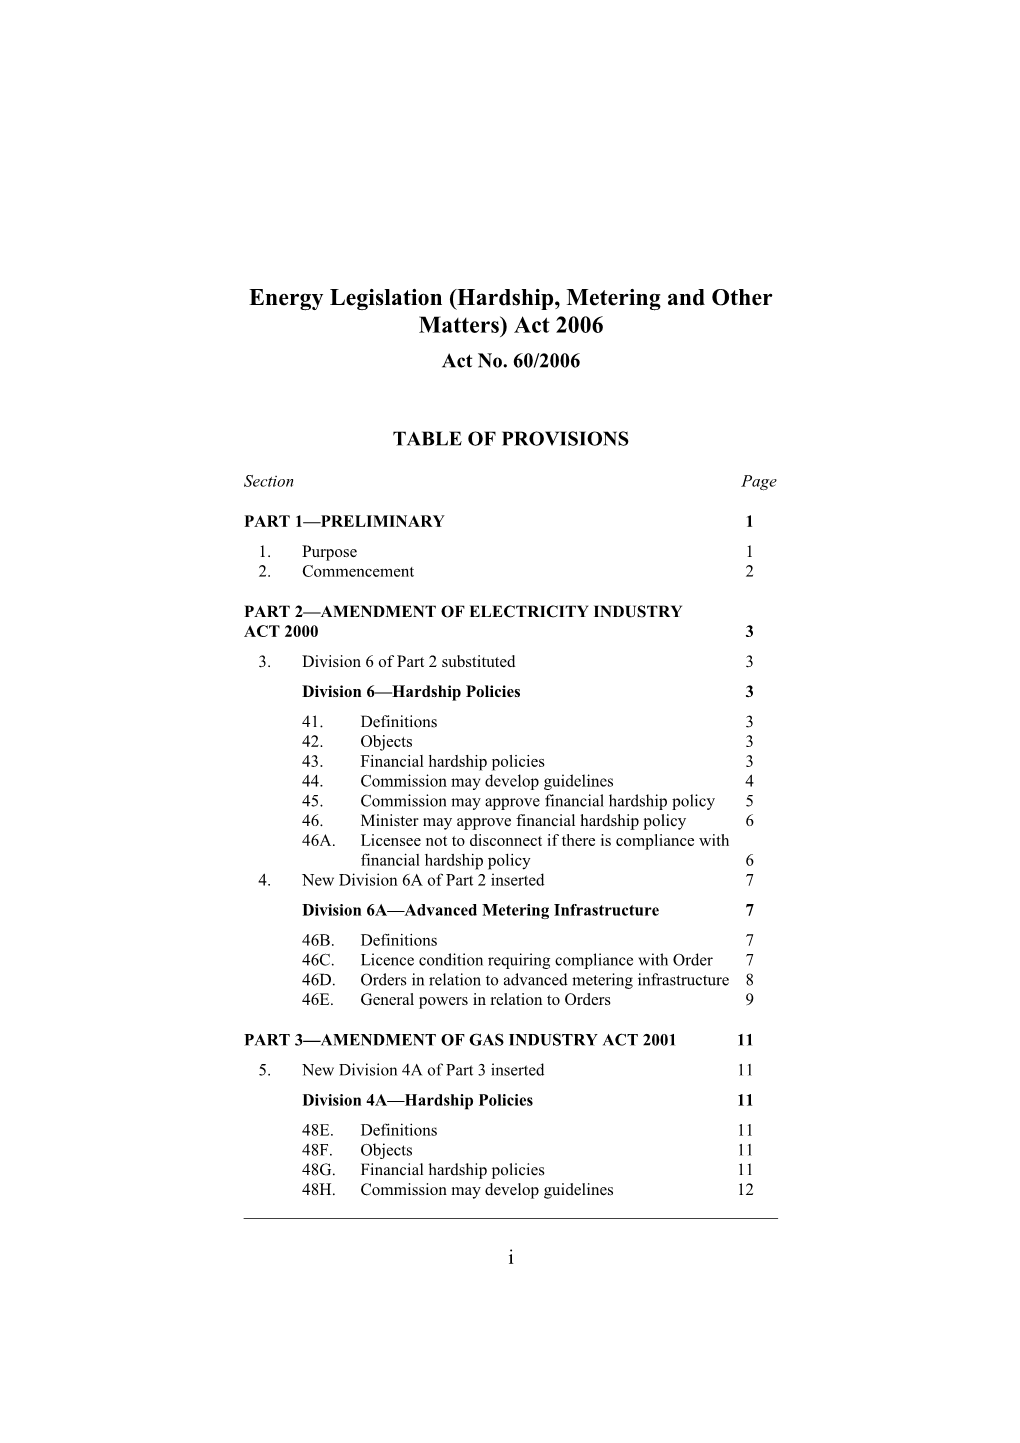 Energy Legislation (Hardship, Metering and Other Matters) Act 2006